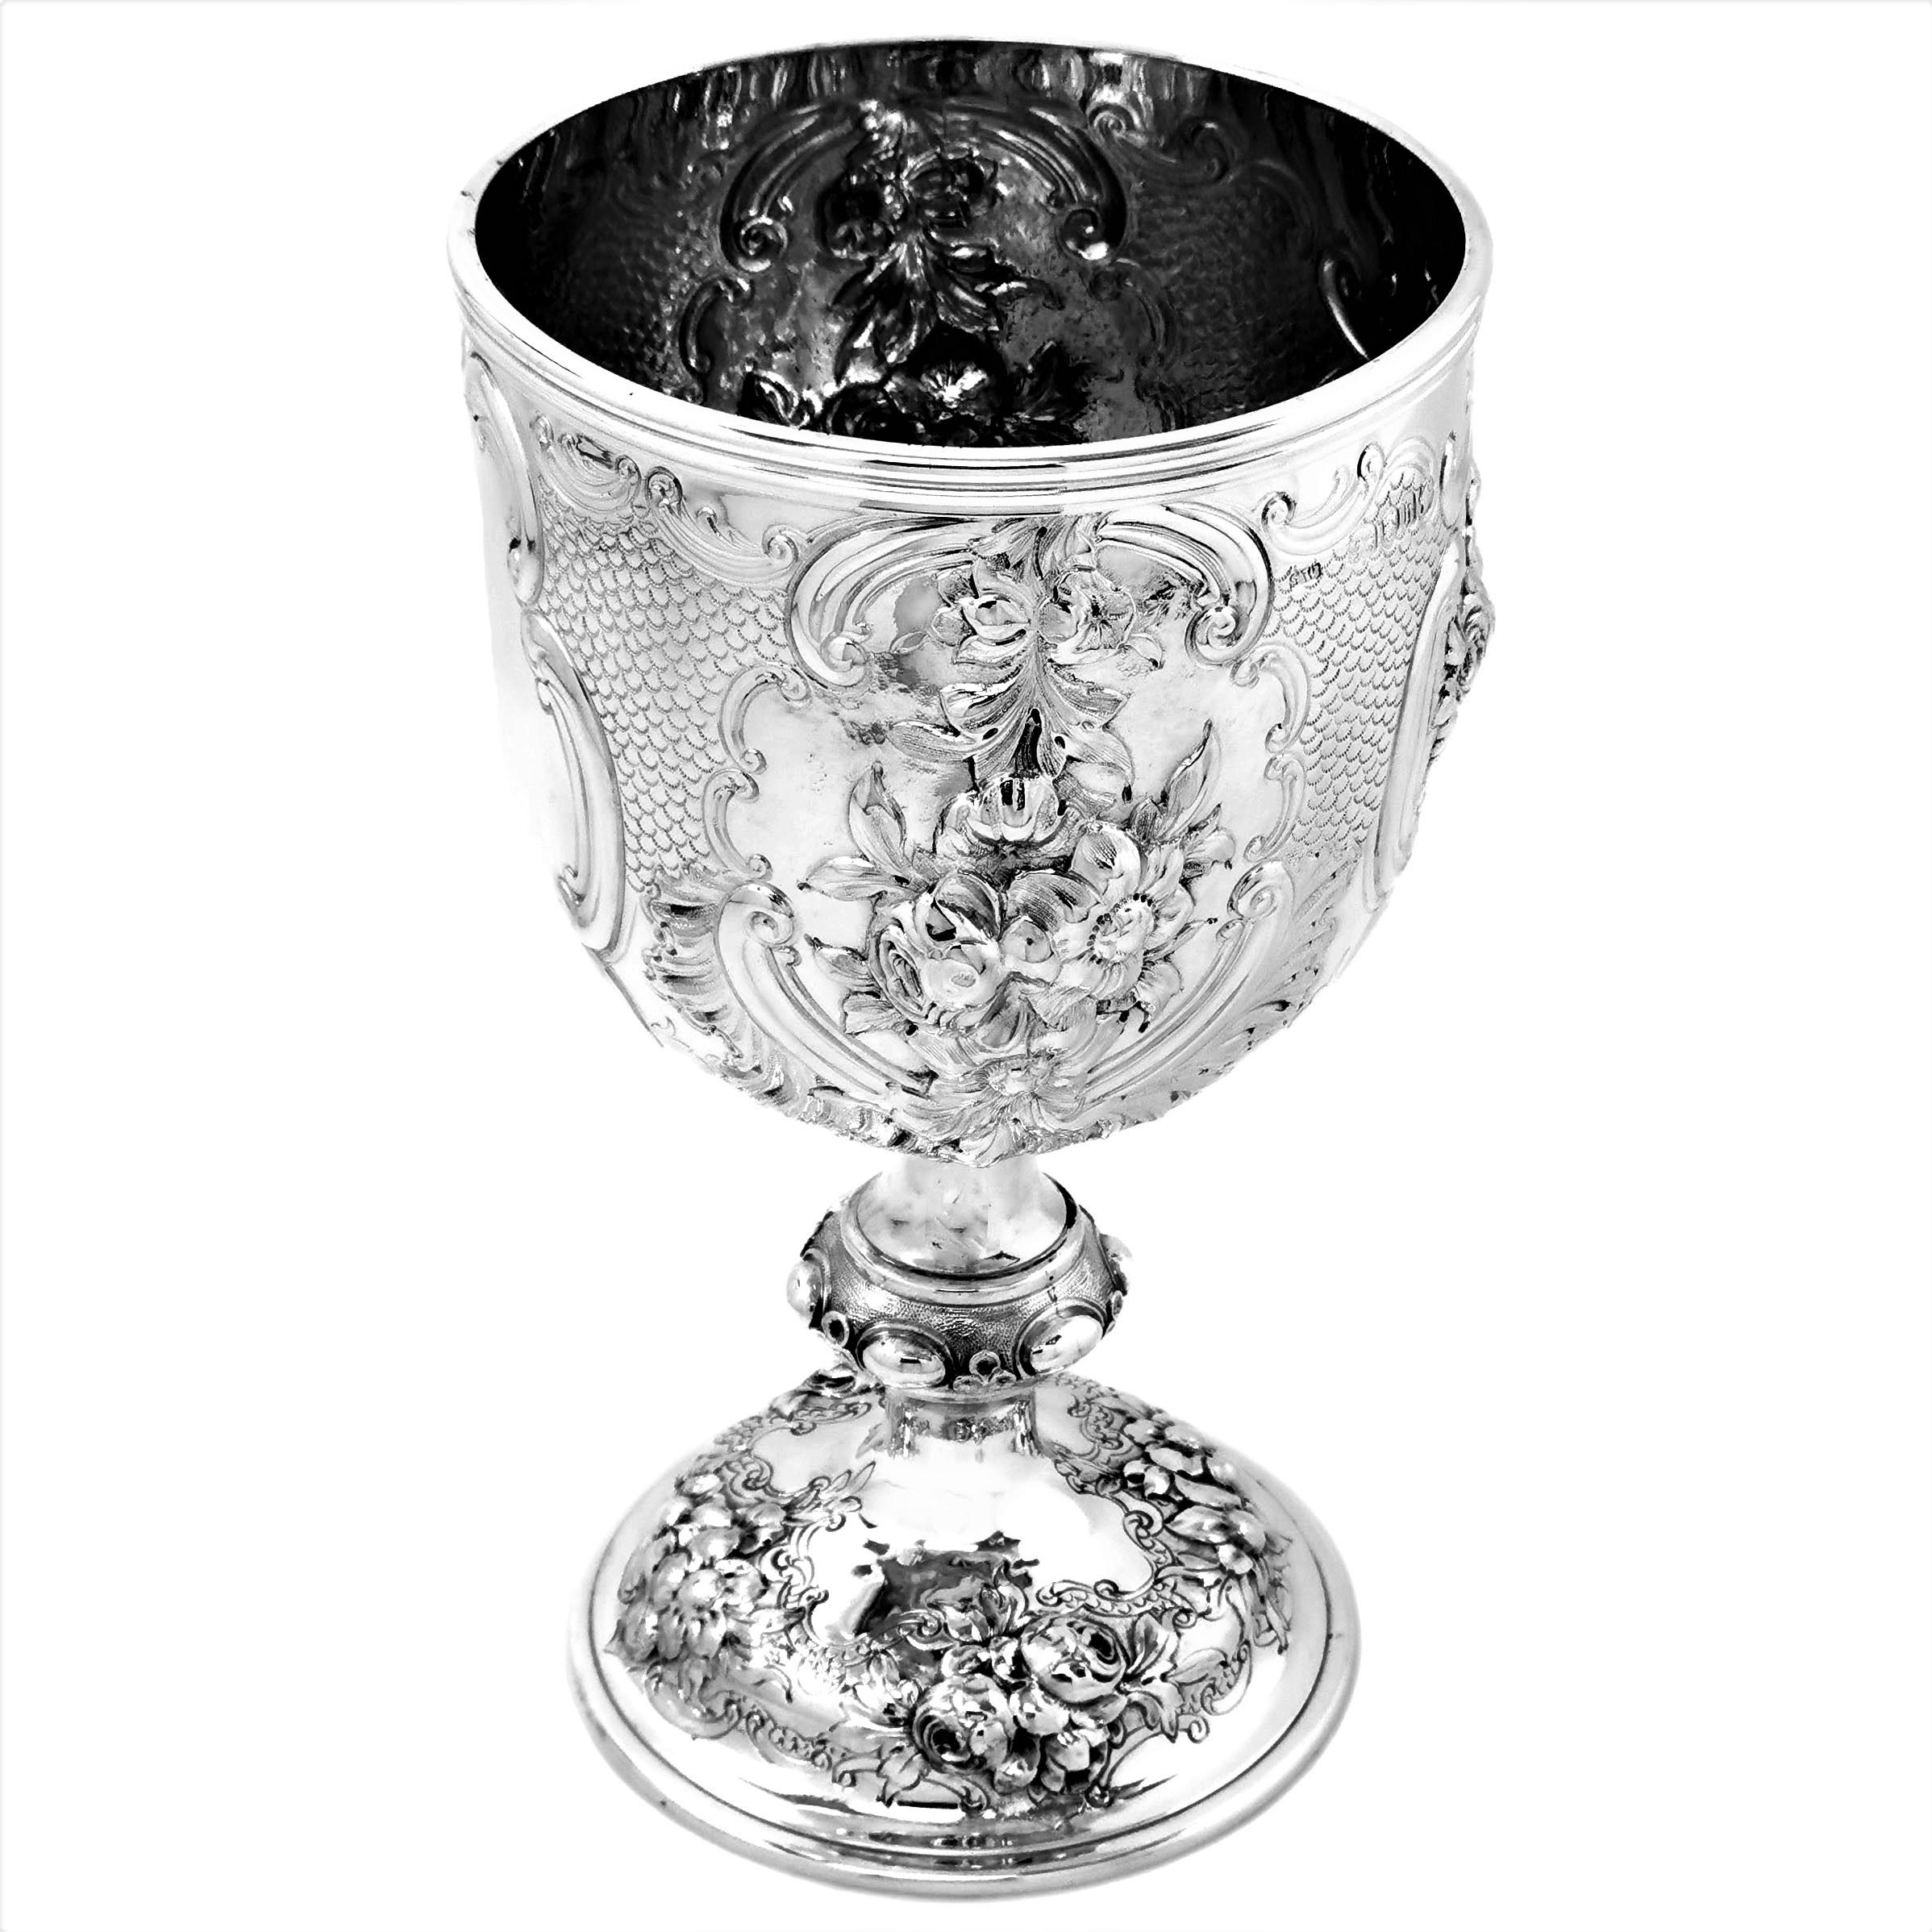 English Large Antique Victorian Sterling Silver Cup / Goblet, 1863